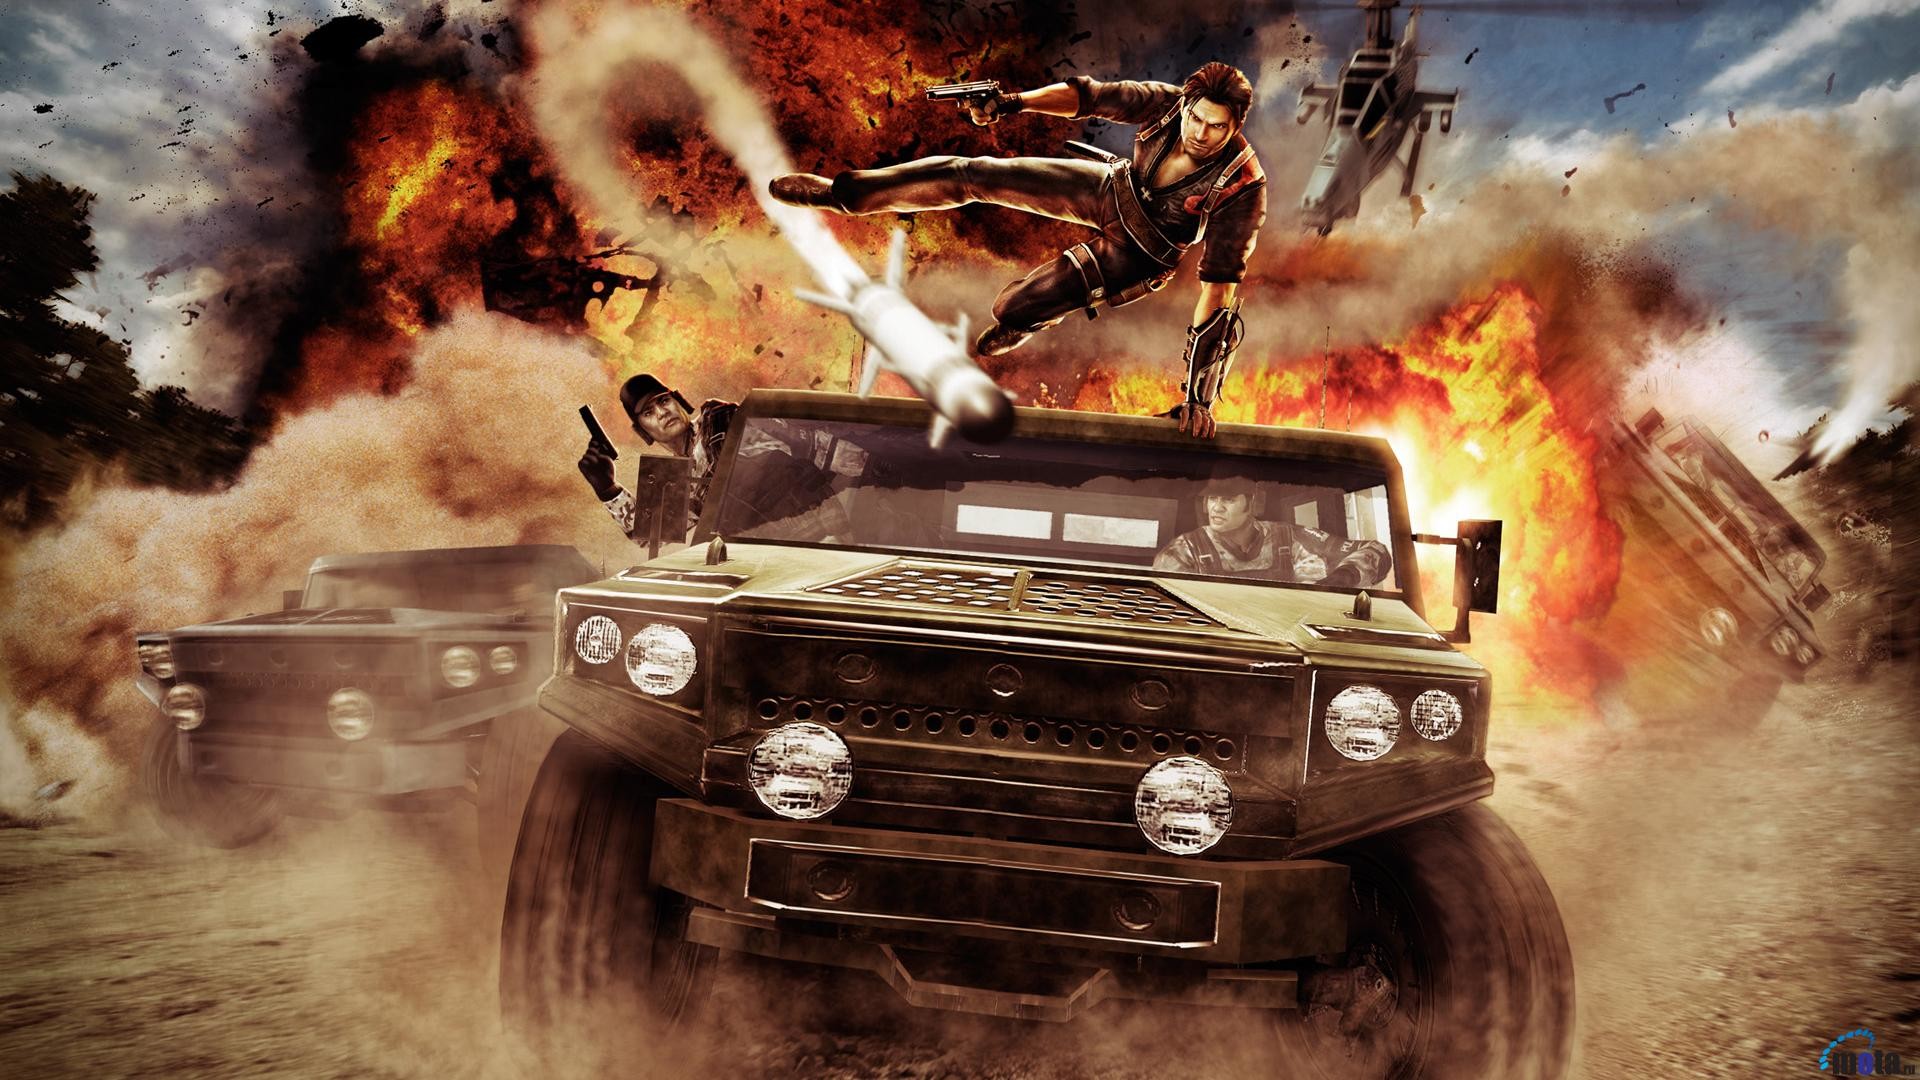 1920x1080 Just Cause 2 Wallpaper 1080p